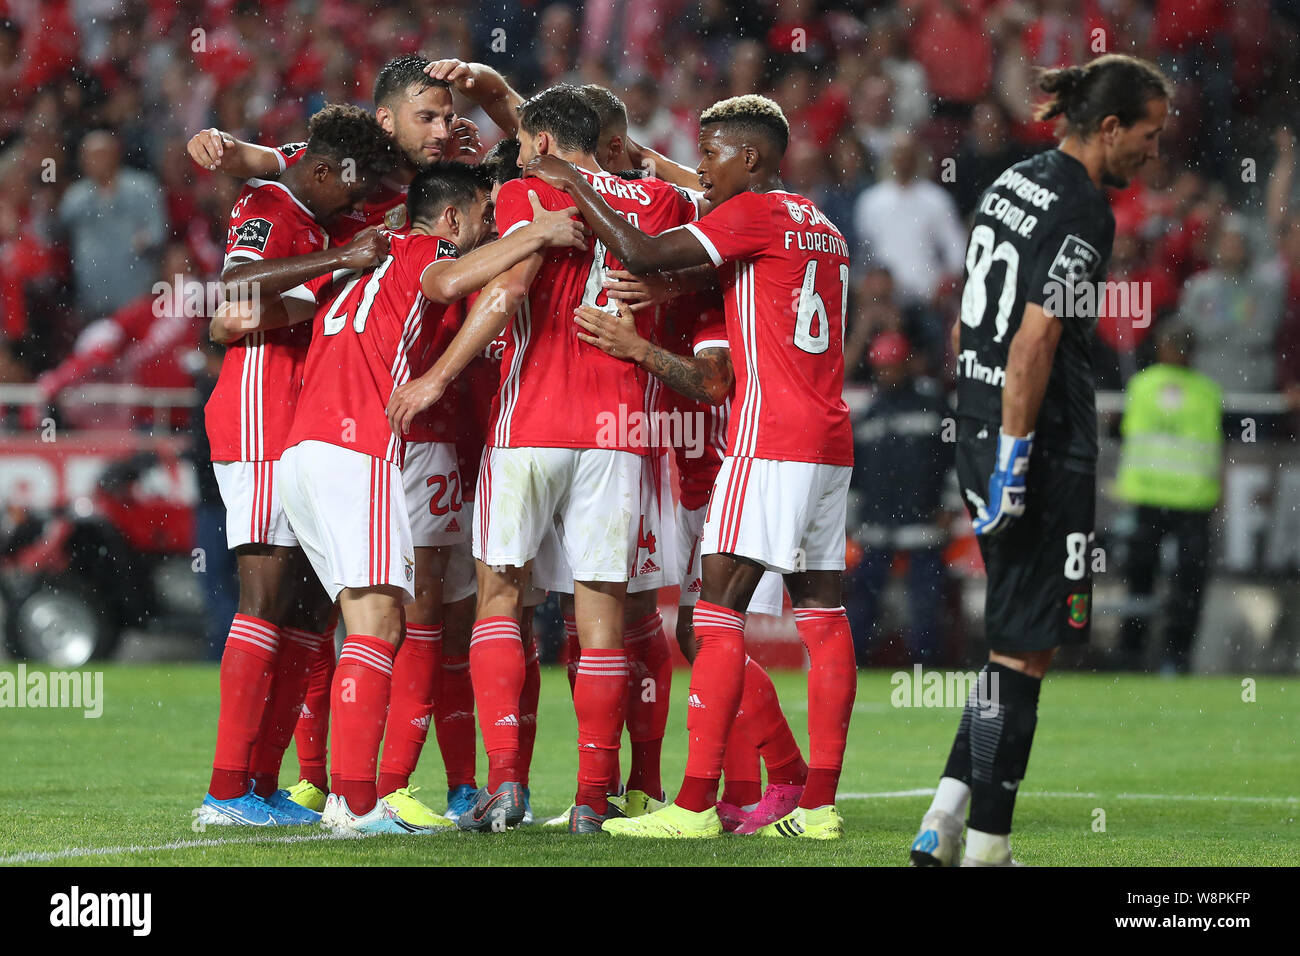 Lisbon, Portugal. 10th Aug, 2019. Haris Seferovic of Benfica celebrates with teammates after scoring during the Primeira Liga football match between SL Benfica and FC Pacos Ferreira at the Luz stadium in Lisbon, Portugal on August 10, 2019. Credit: Pedro Fiuza/ZUMA Wire/Alamy Live News Stock Photo